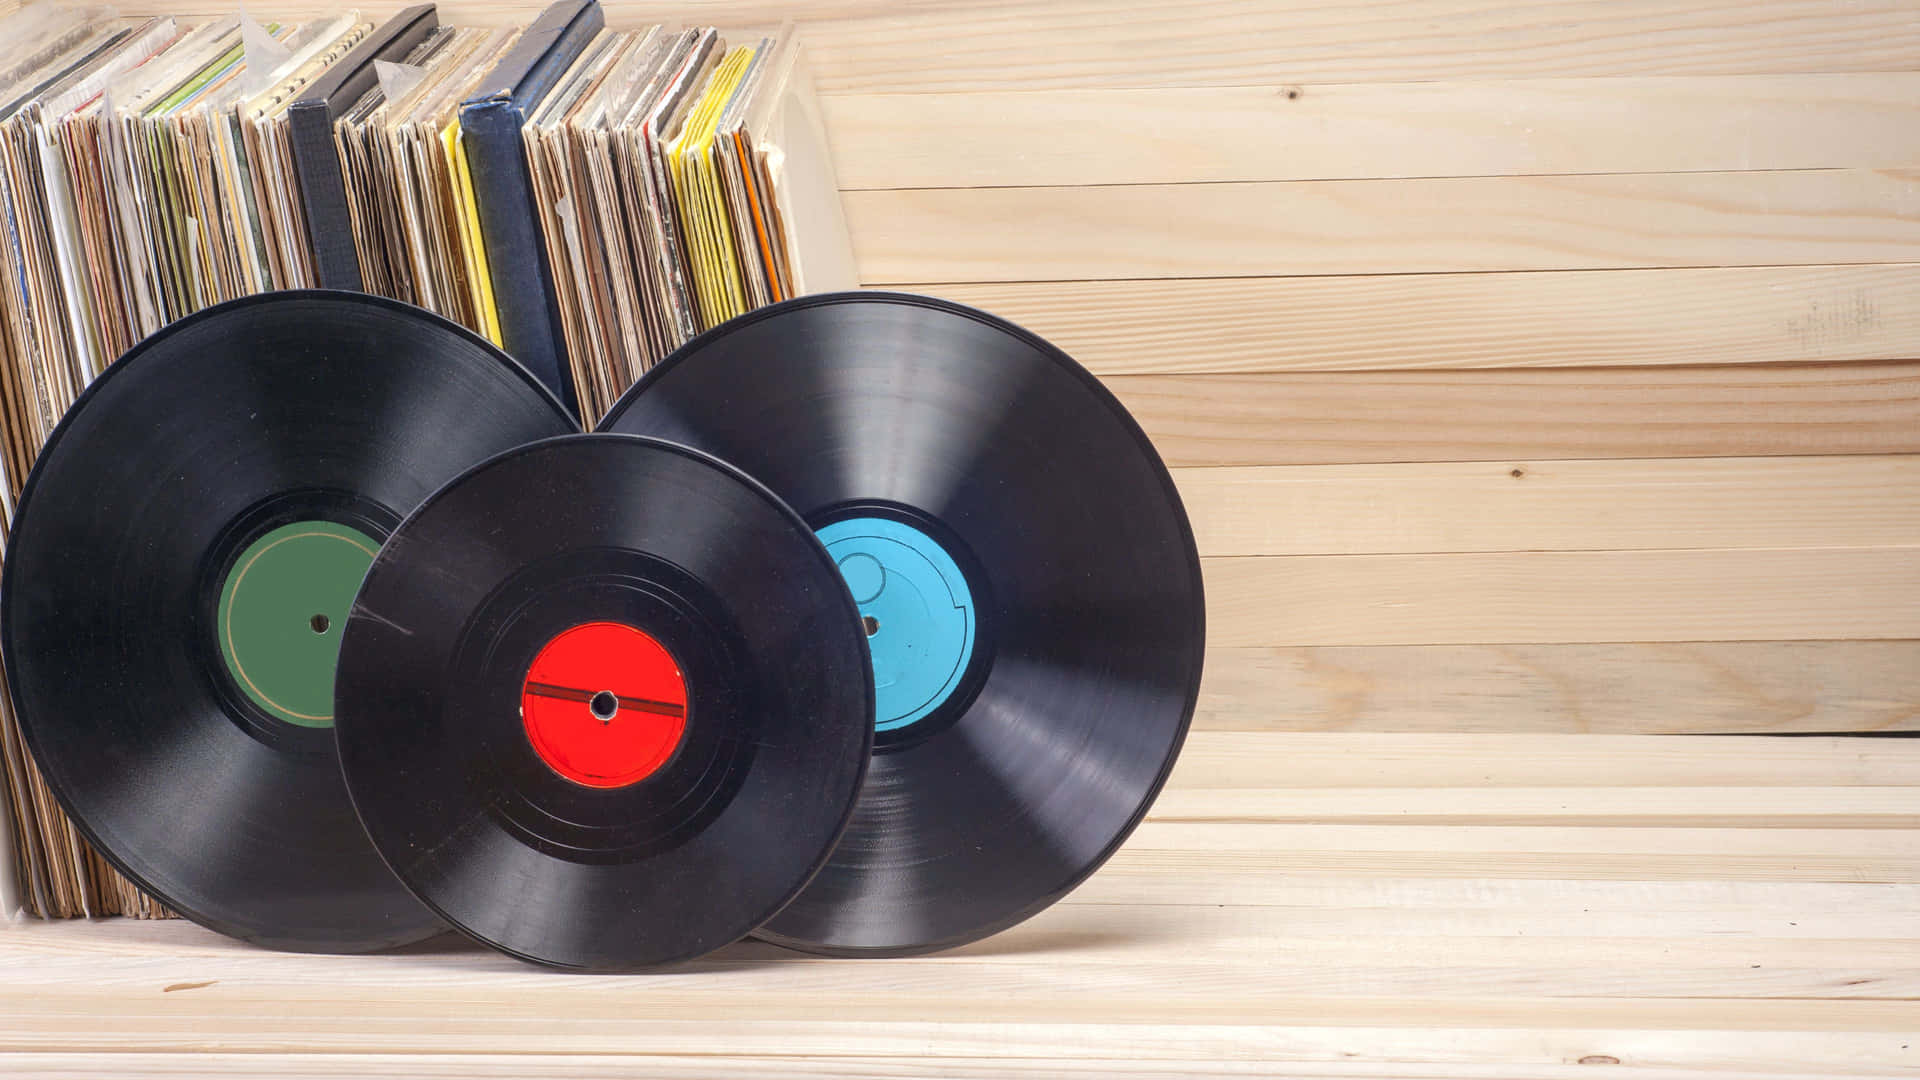 Vintage Vinyl Record on Wooden Table